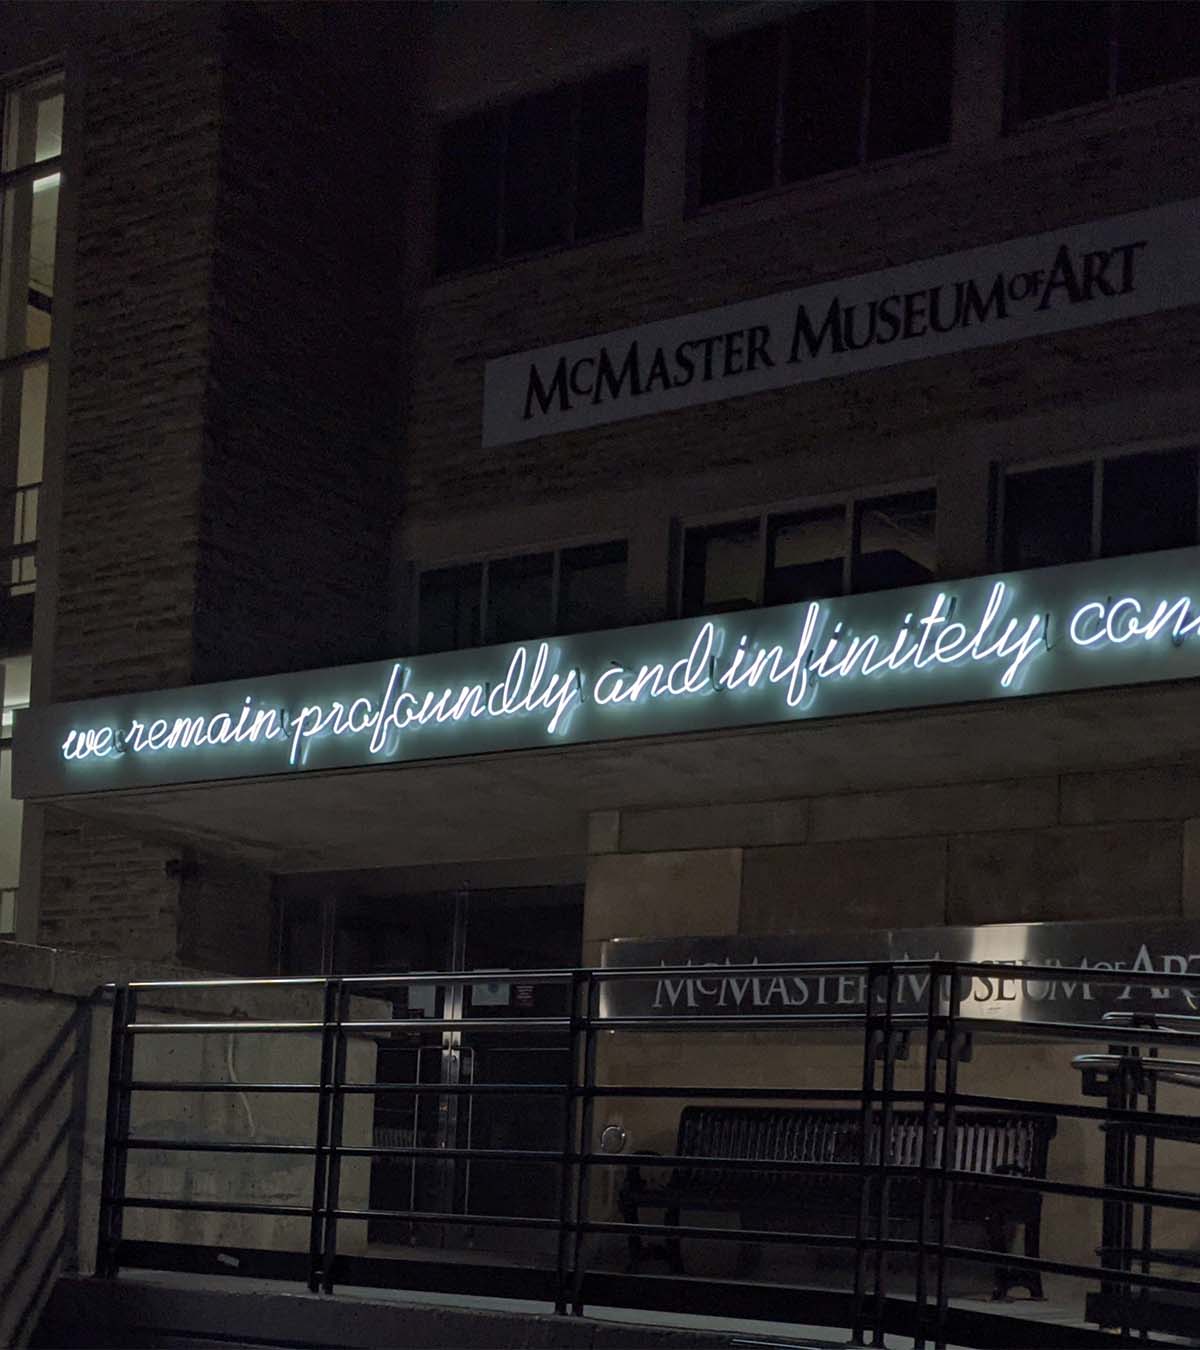 Detail of neon sculpture that reads 'we remain profoundly and infinitely connected' on the facade of the museum